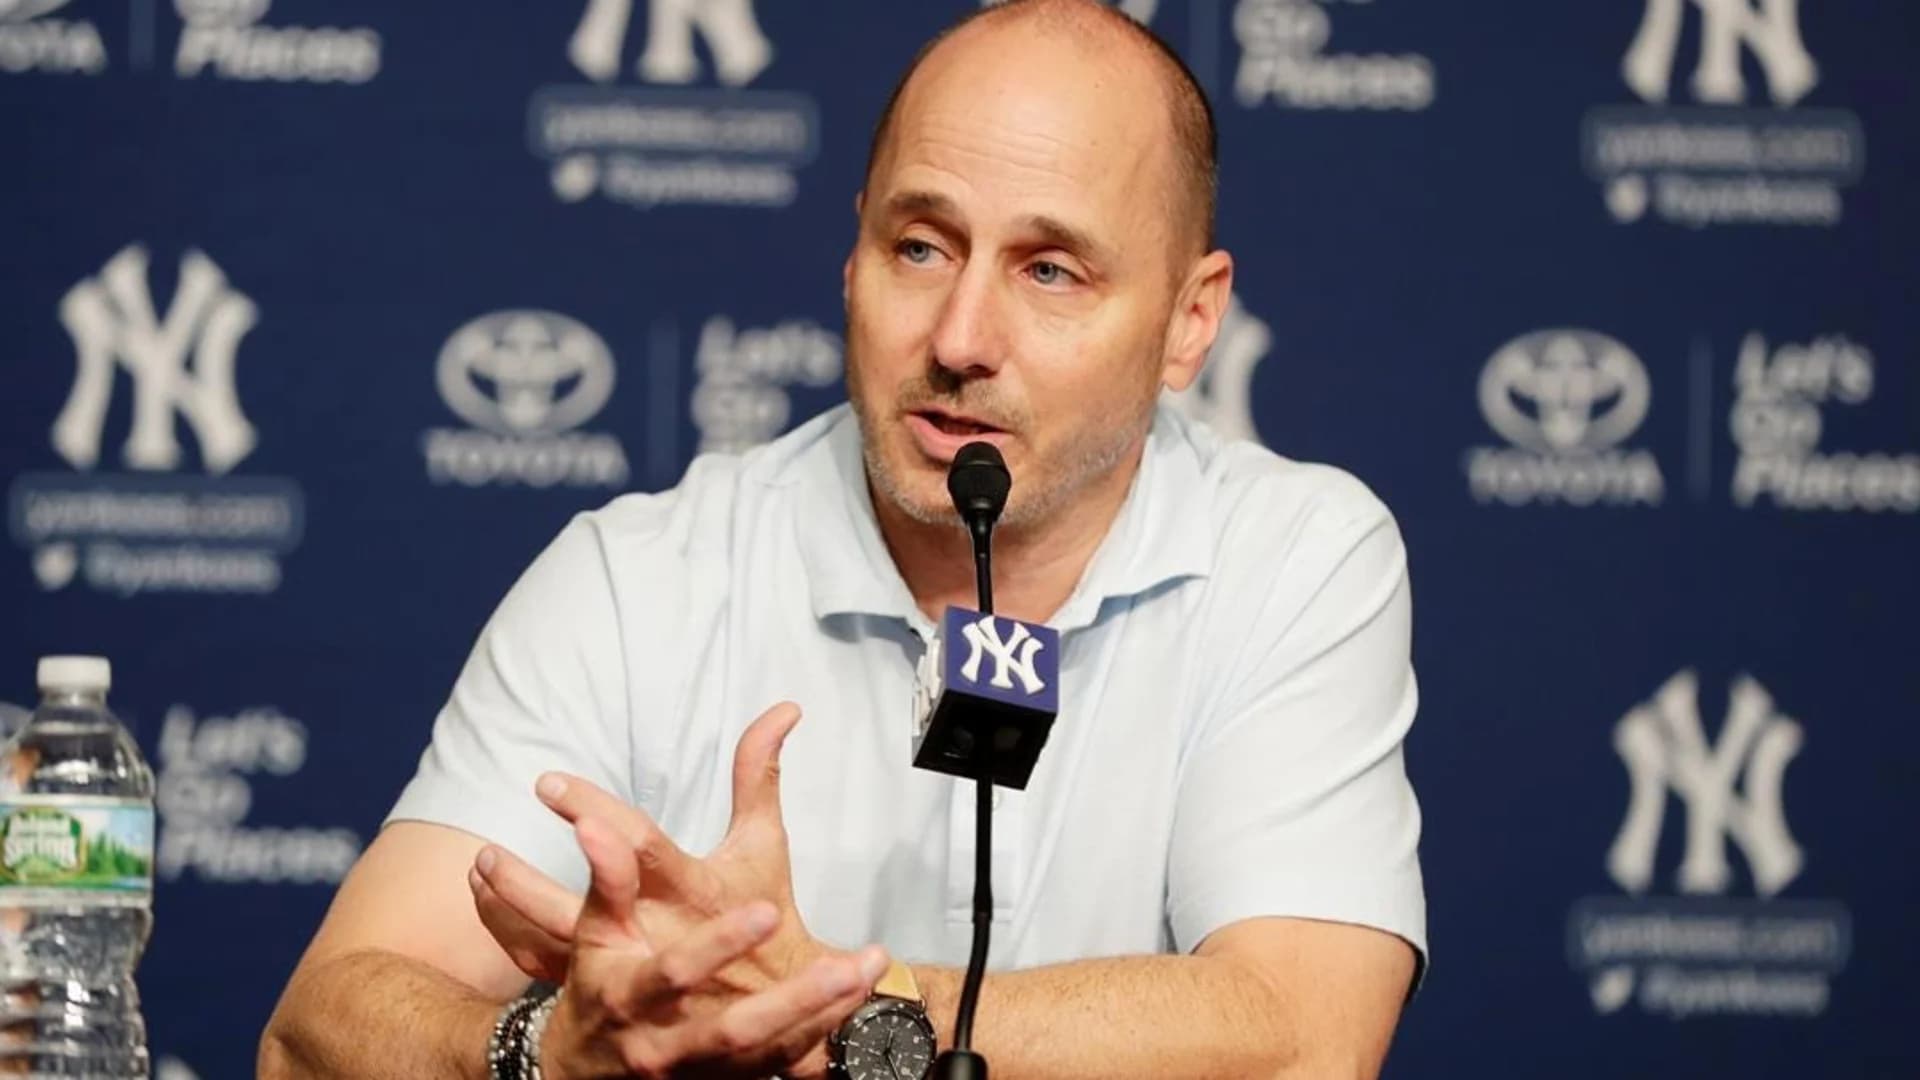 Mix-up involving report of armed man leads Darien police to stop Yankees GM Cashman